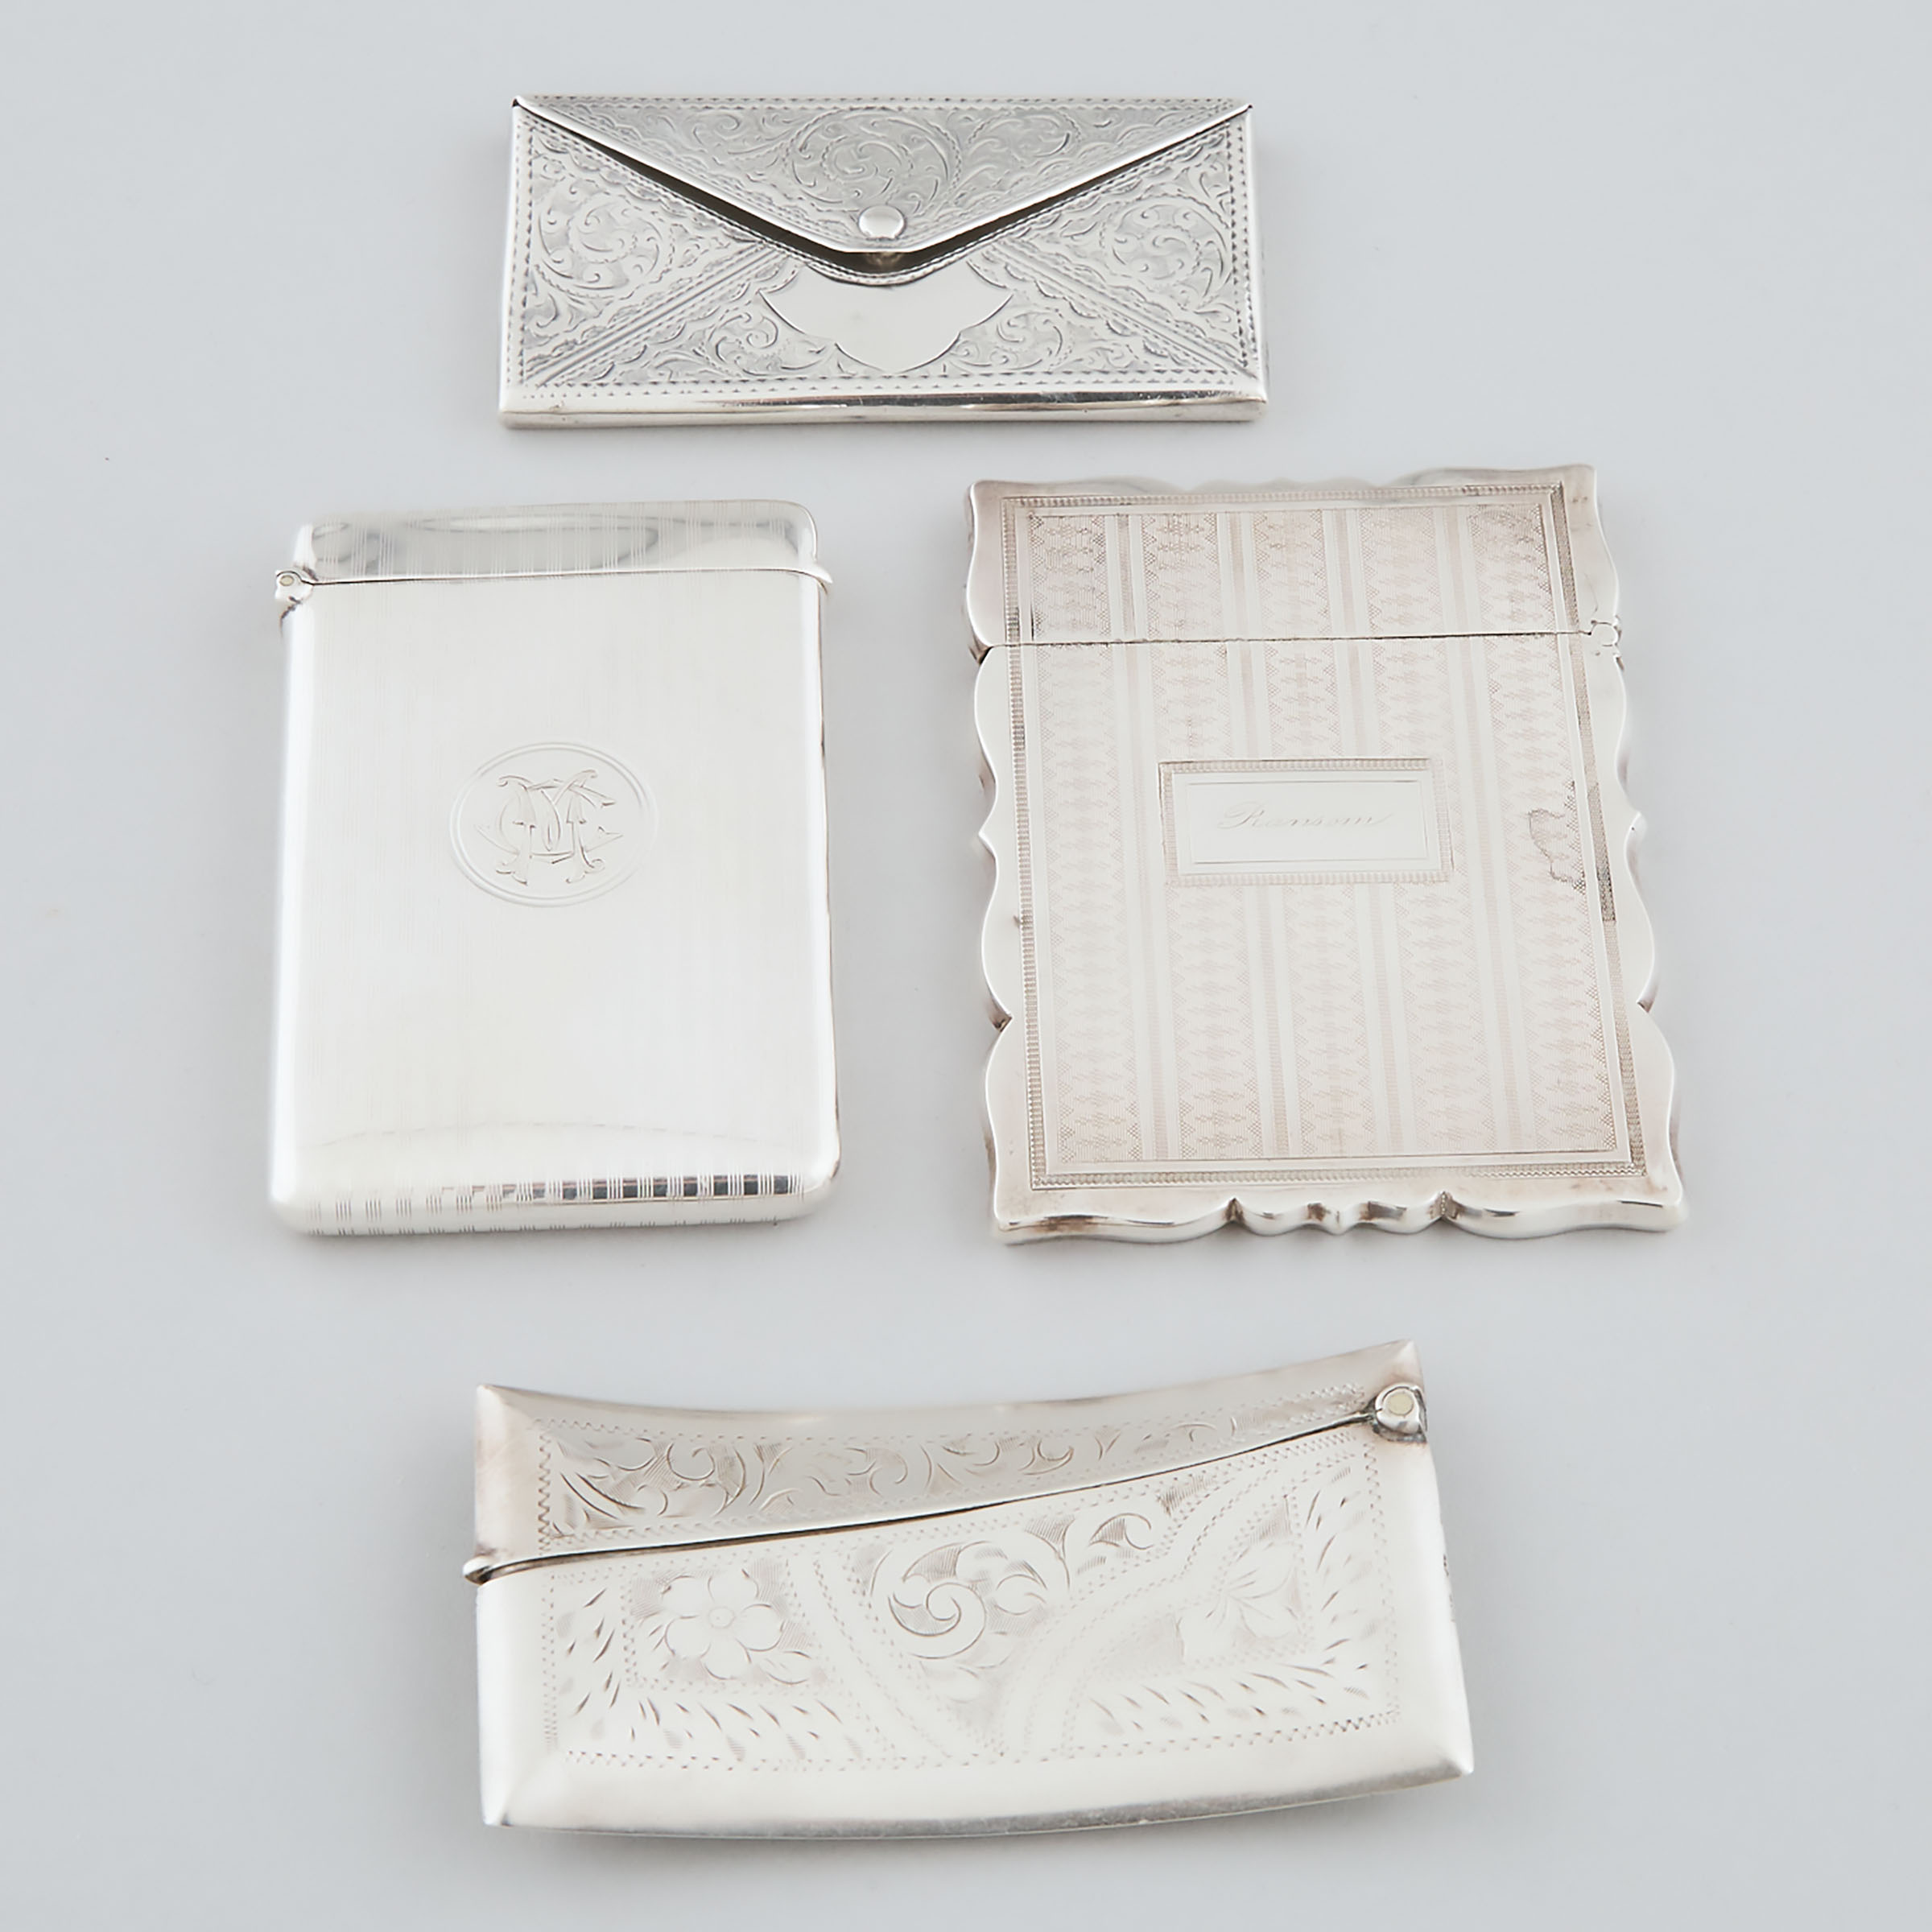 Four Edwardian and American Silver Card Cases, late 19th/early 20th century